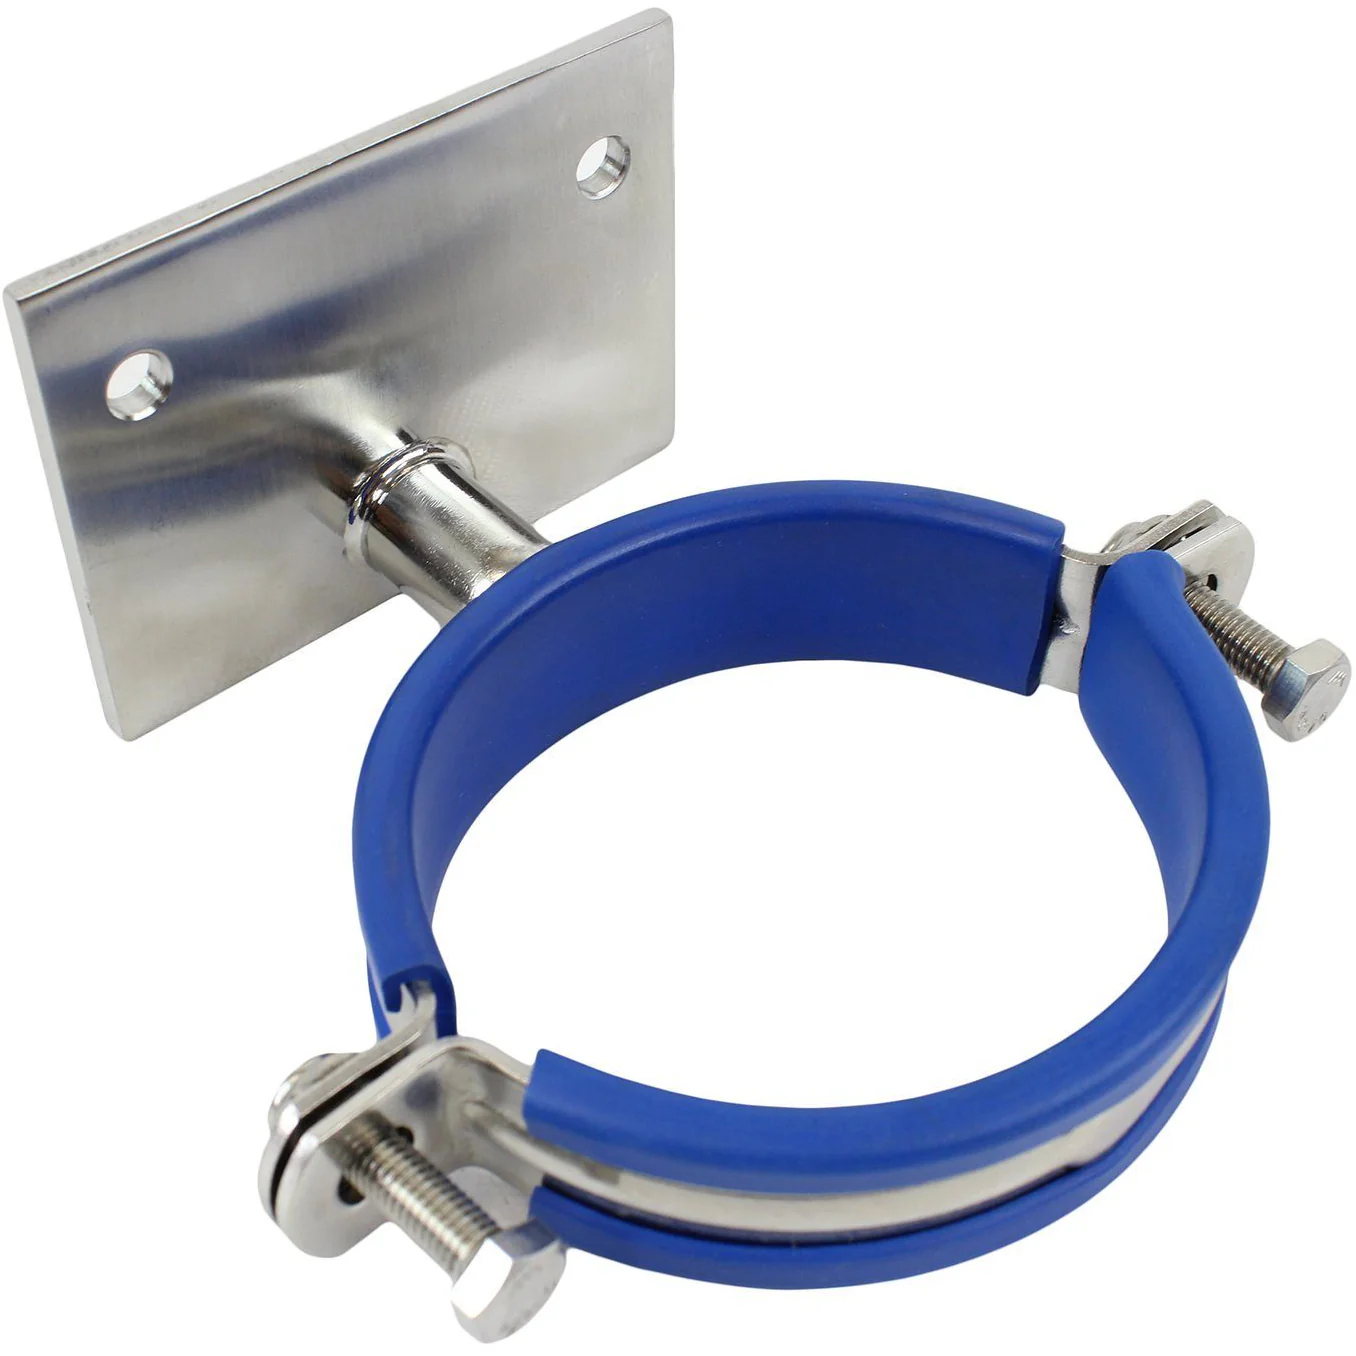 Pipe Hangers with Bracket Mount Questions & Answers